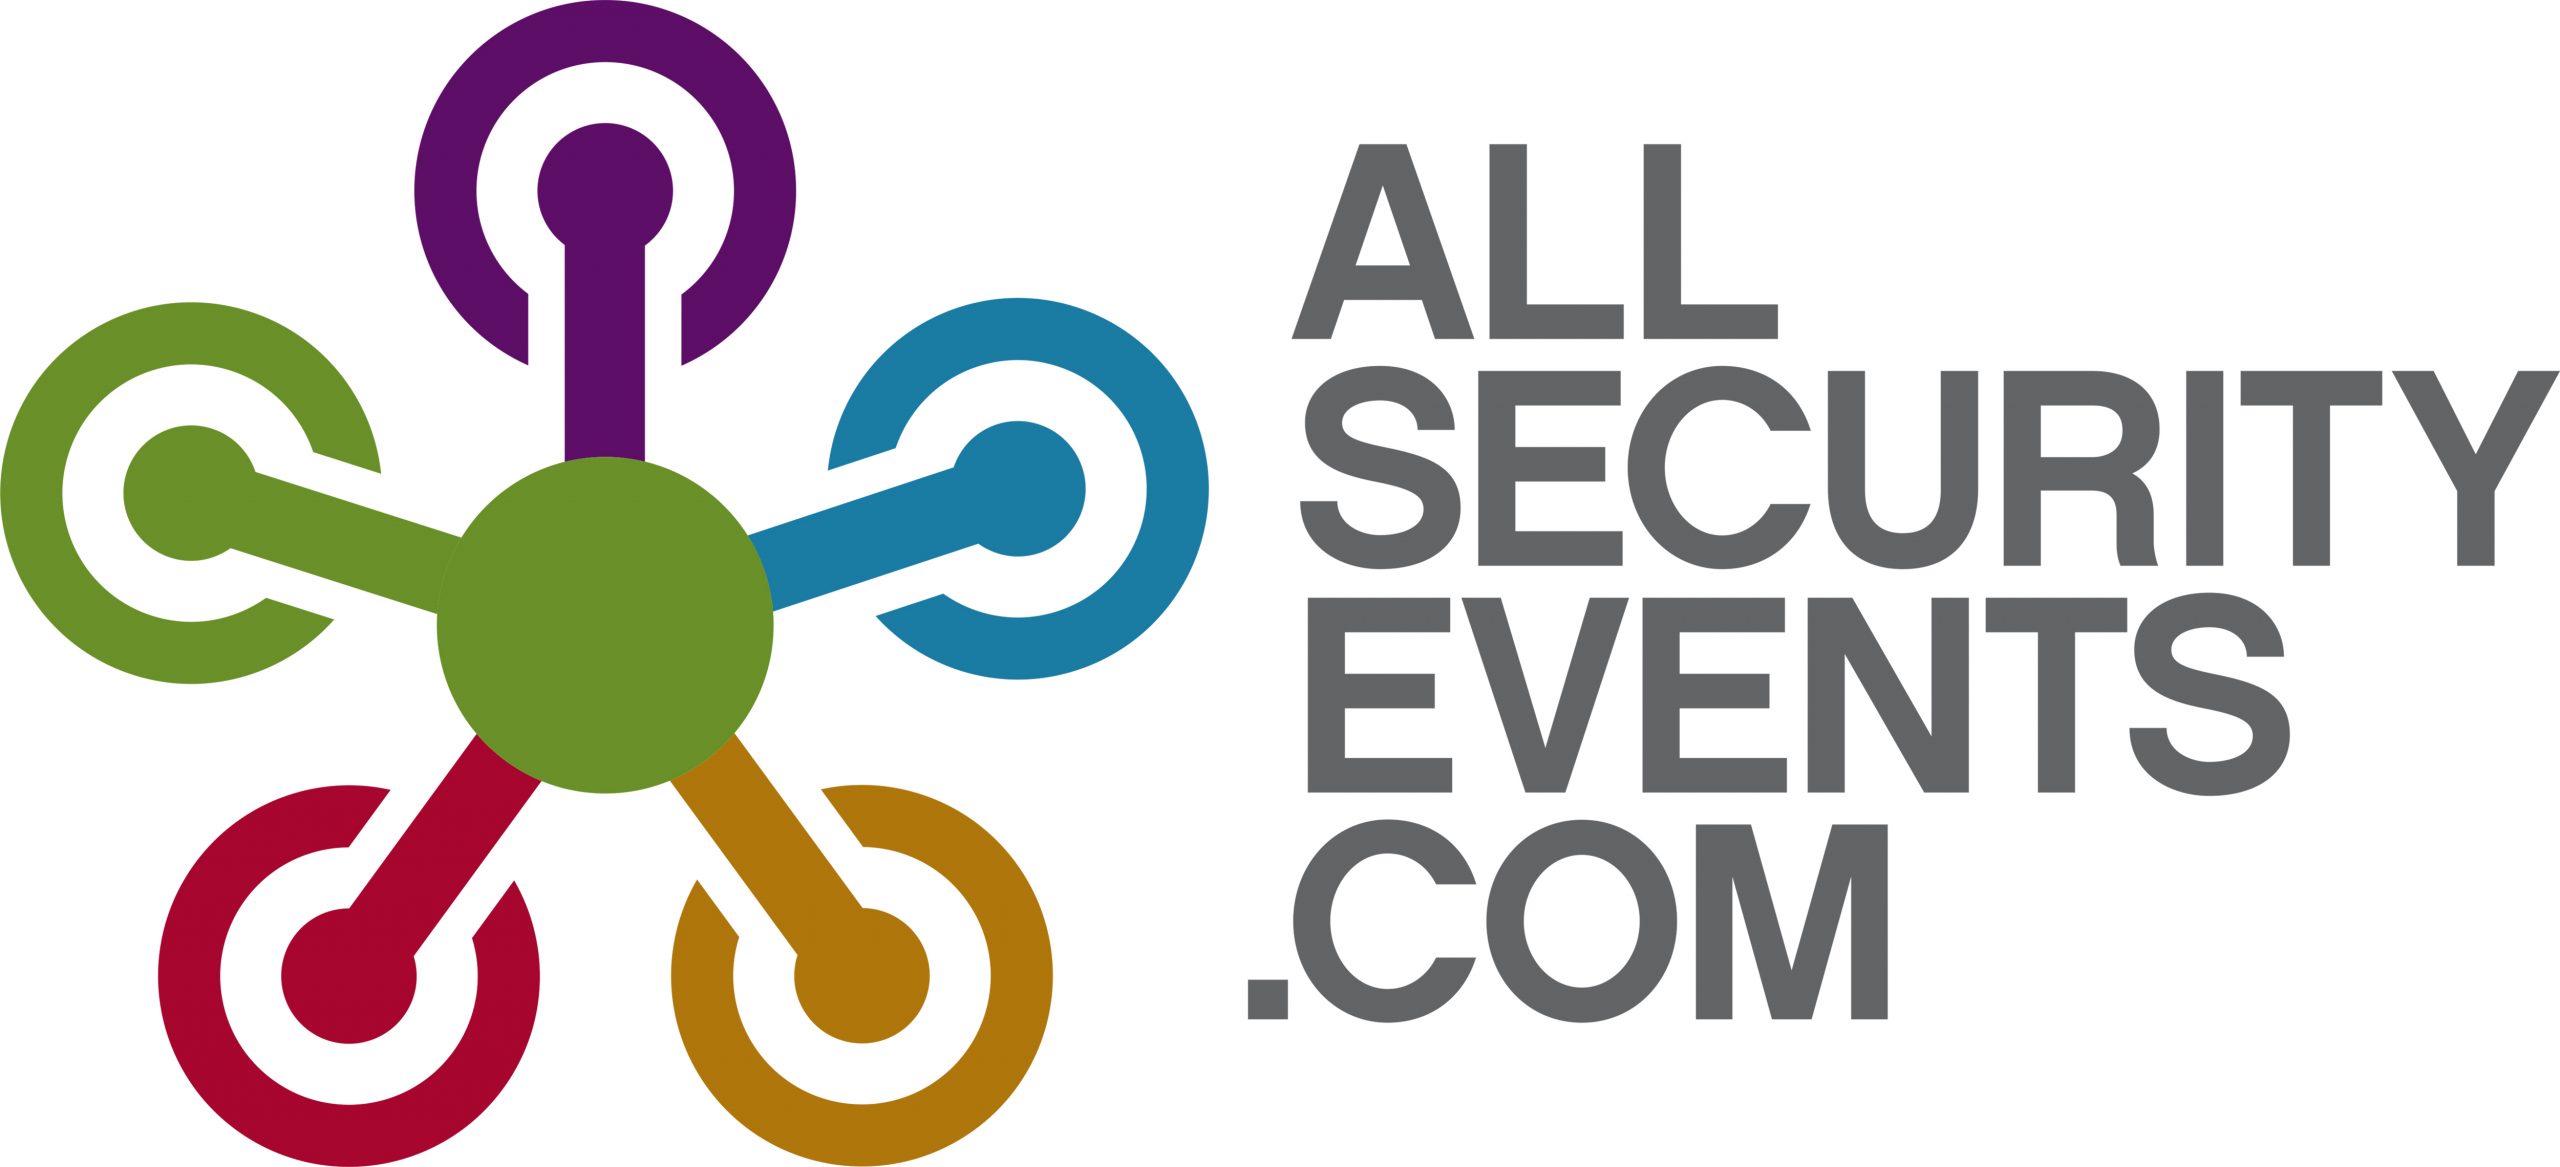 All Security Events Logo